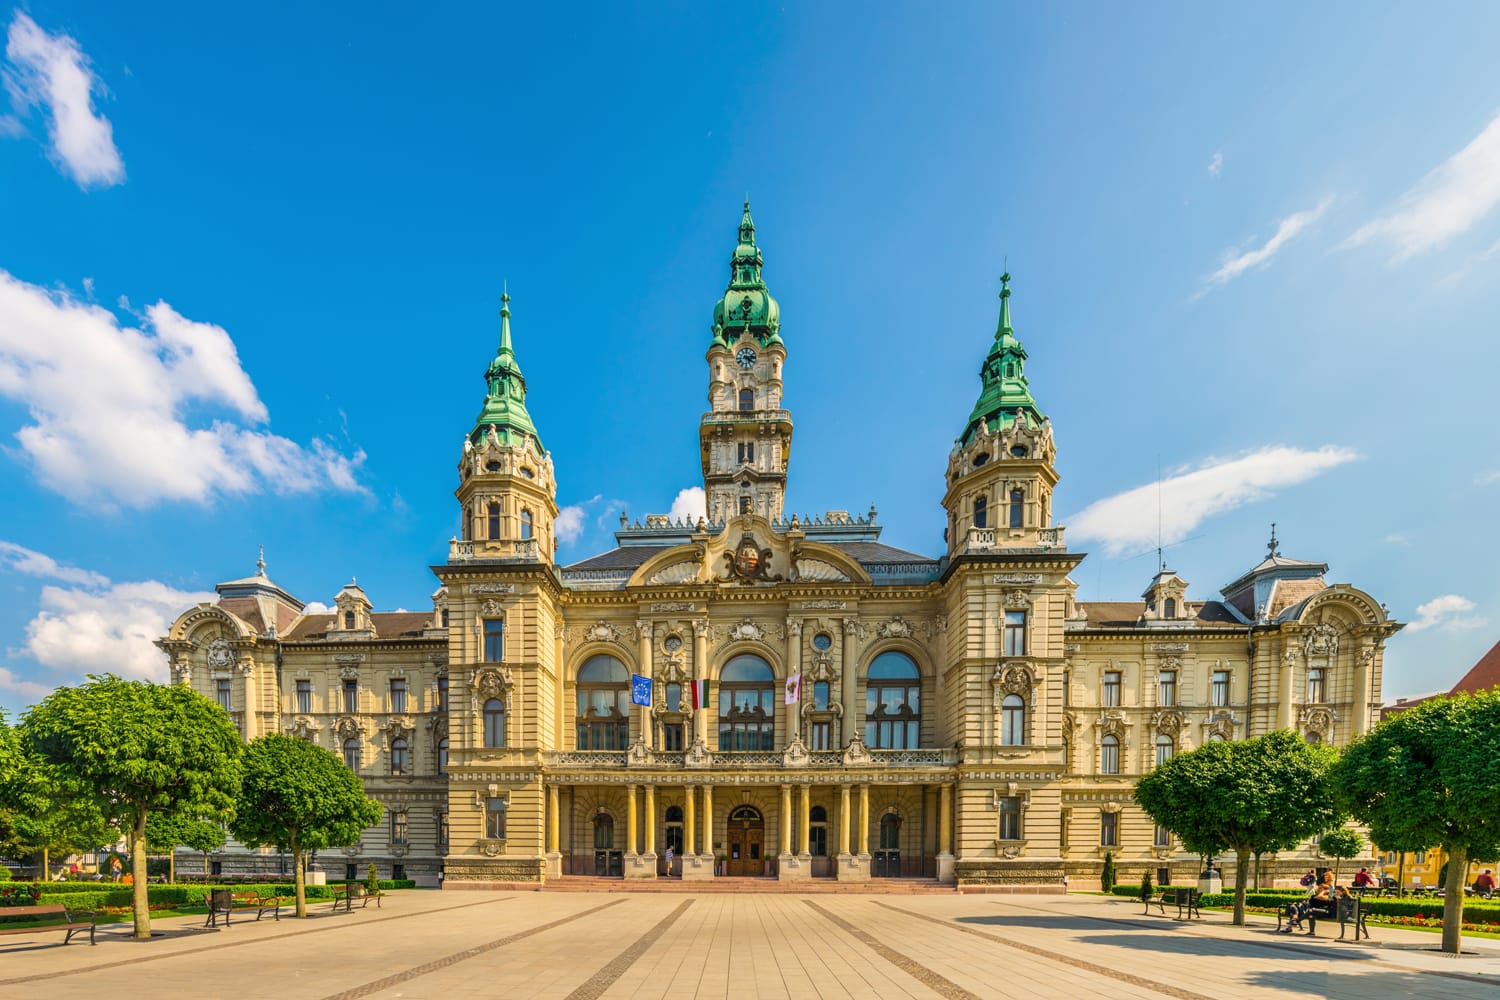 View of the town hall in Gyor, Hungary